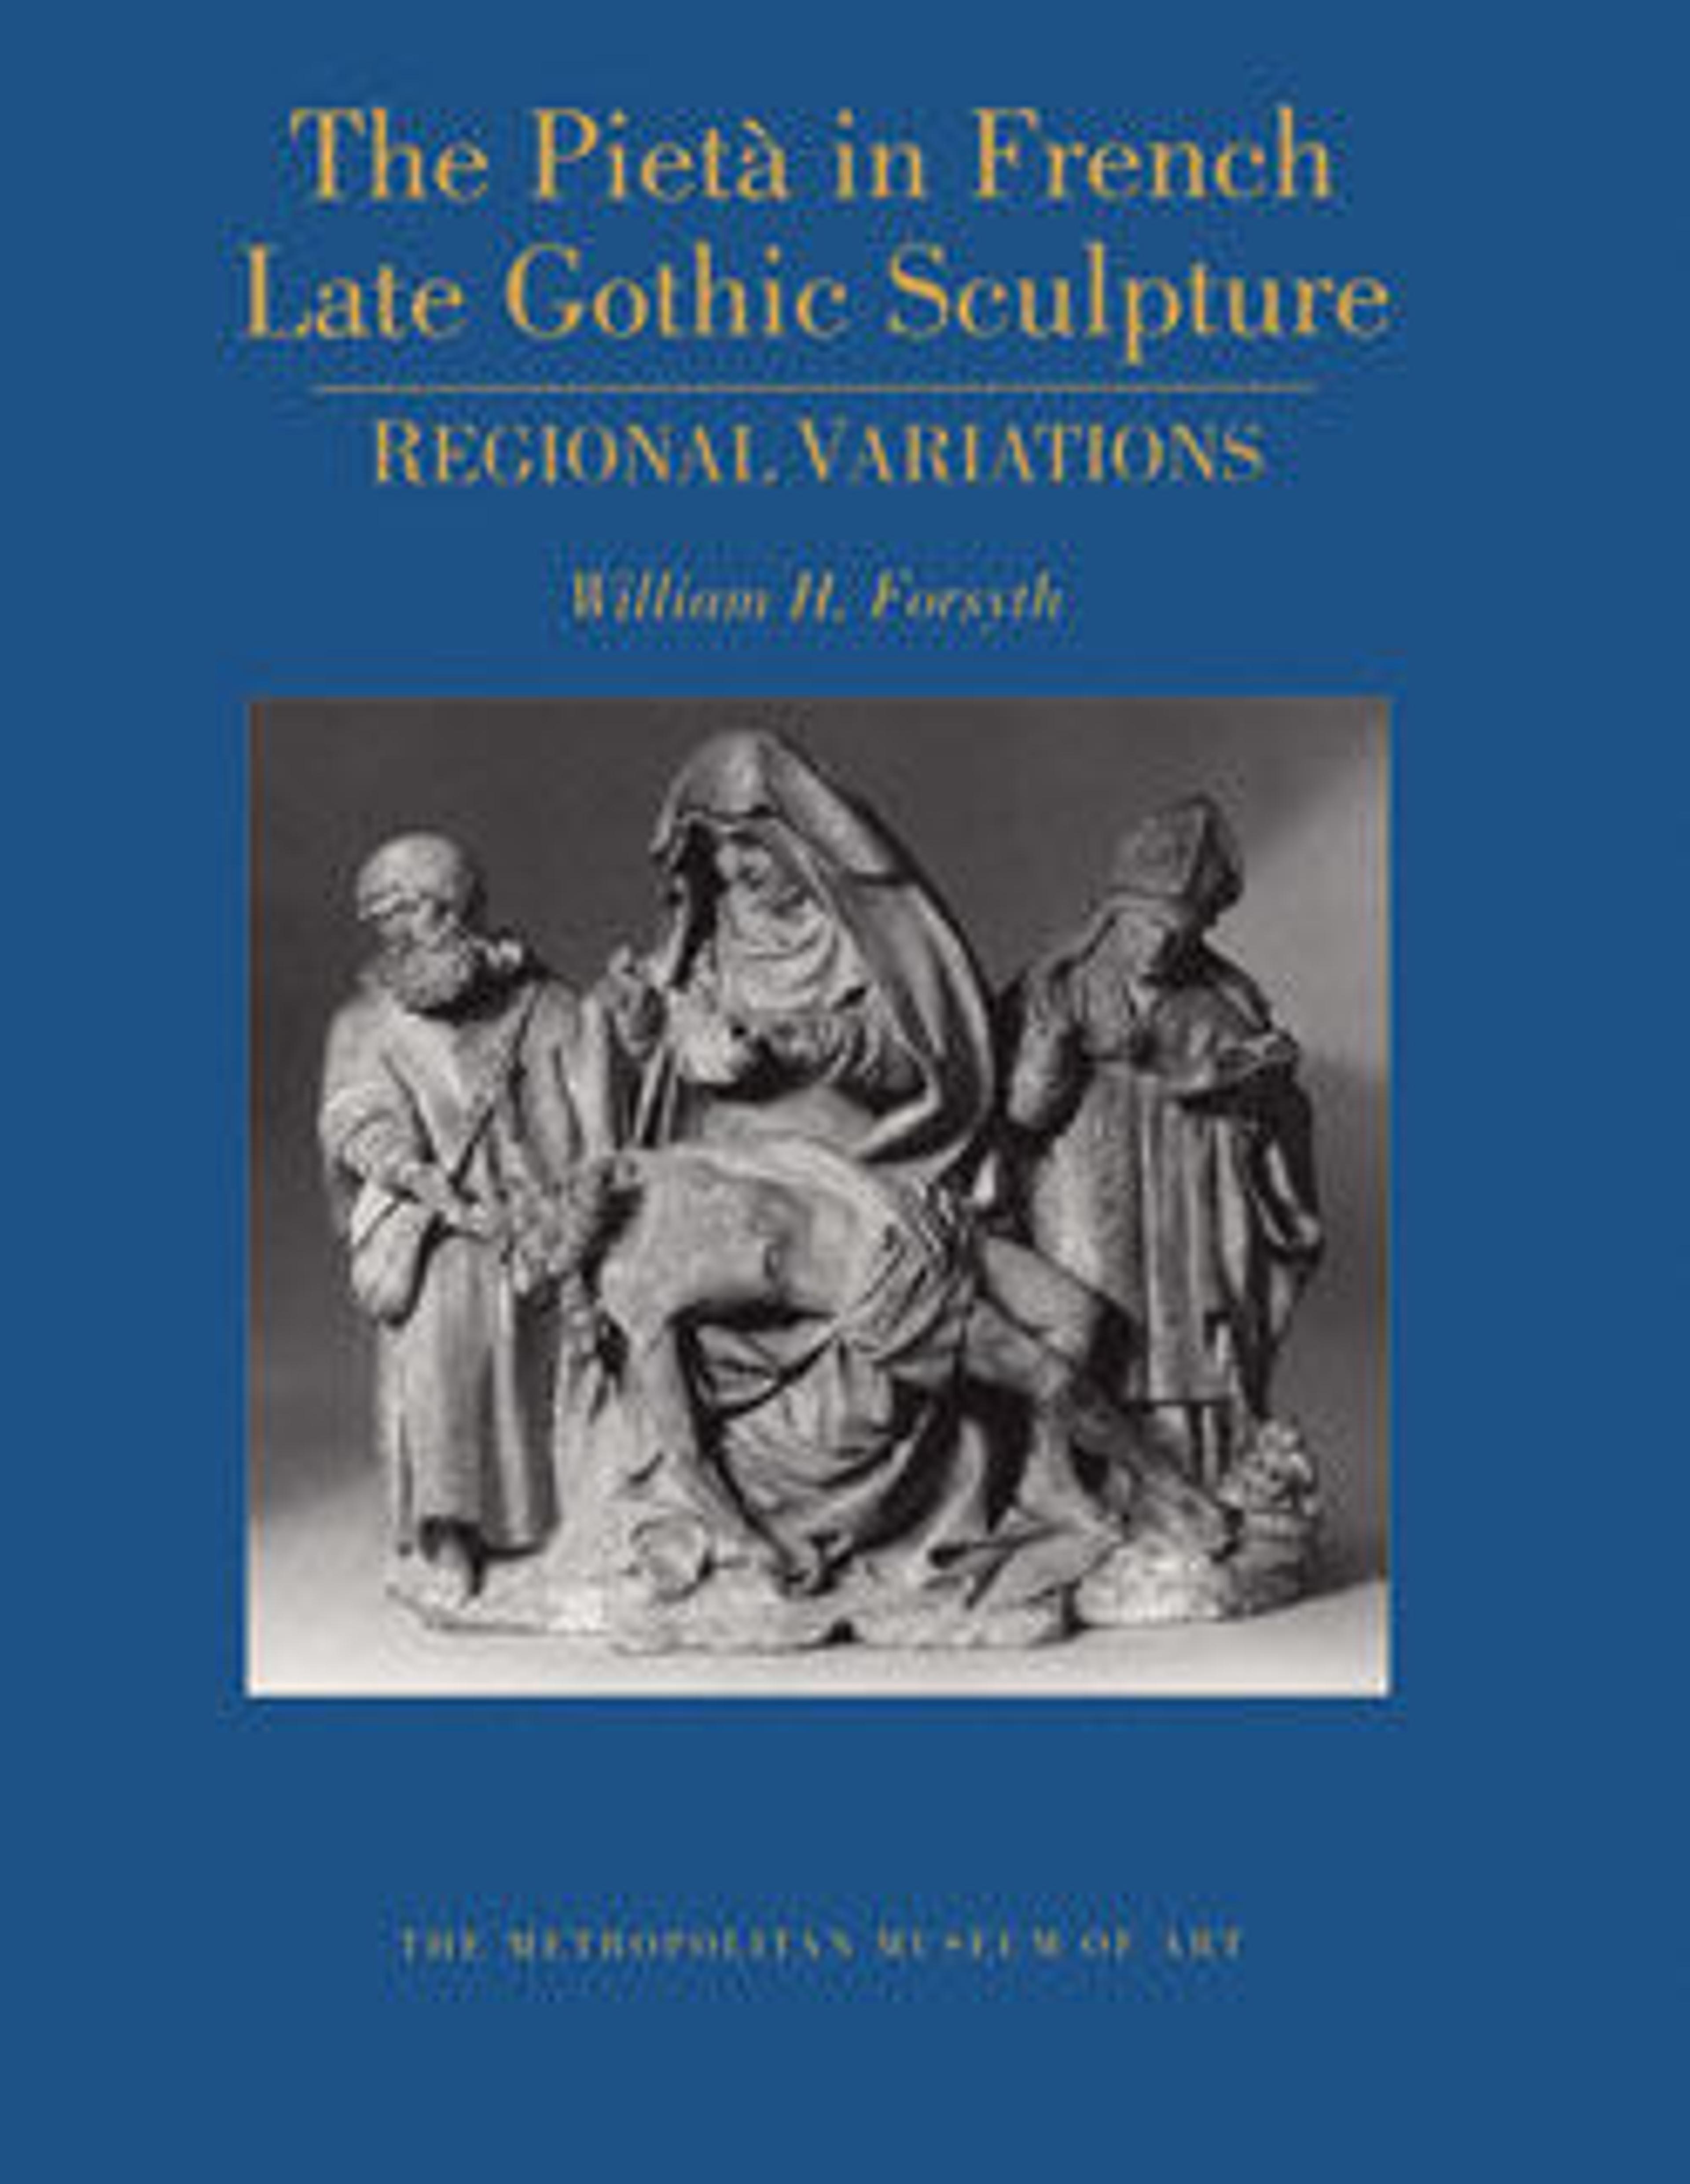 The Pieta in French Late Gothic Sculpture: Regional Variations